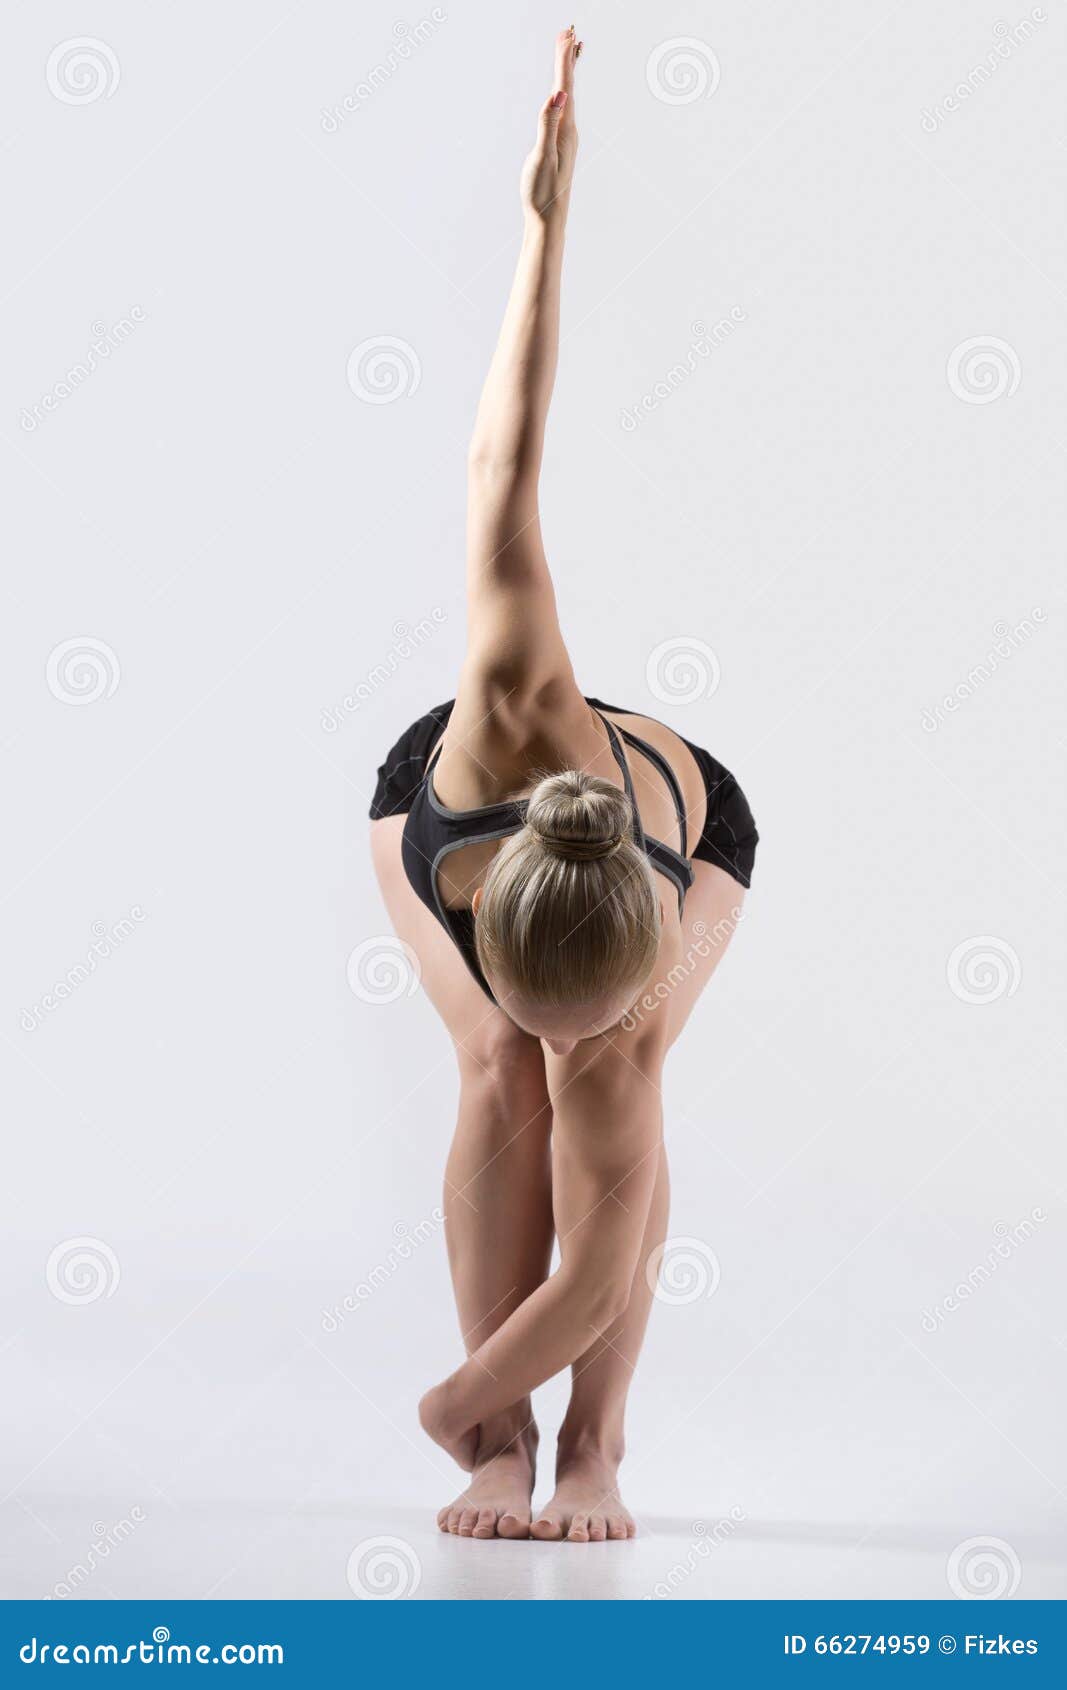 variation revolved chair pose sporty beautiful young woman practicing yoga doing parivrtta utkatasana working out wearing black 66274959